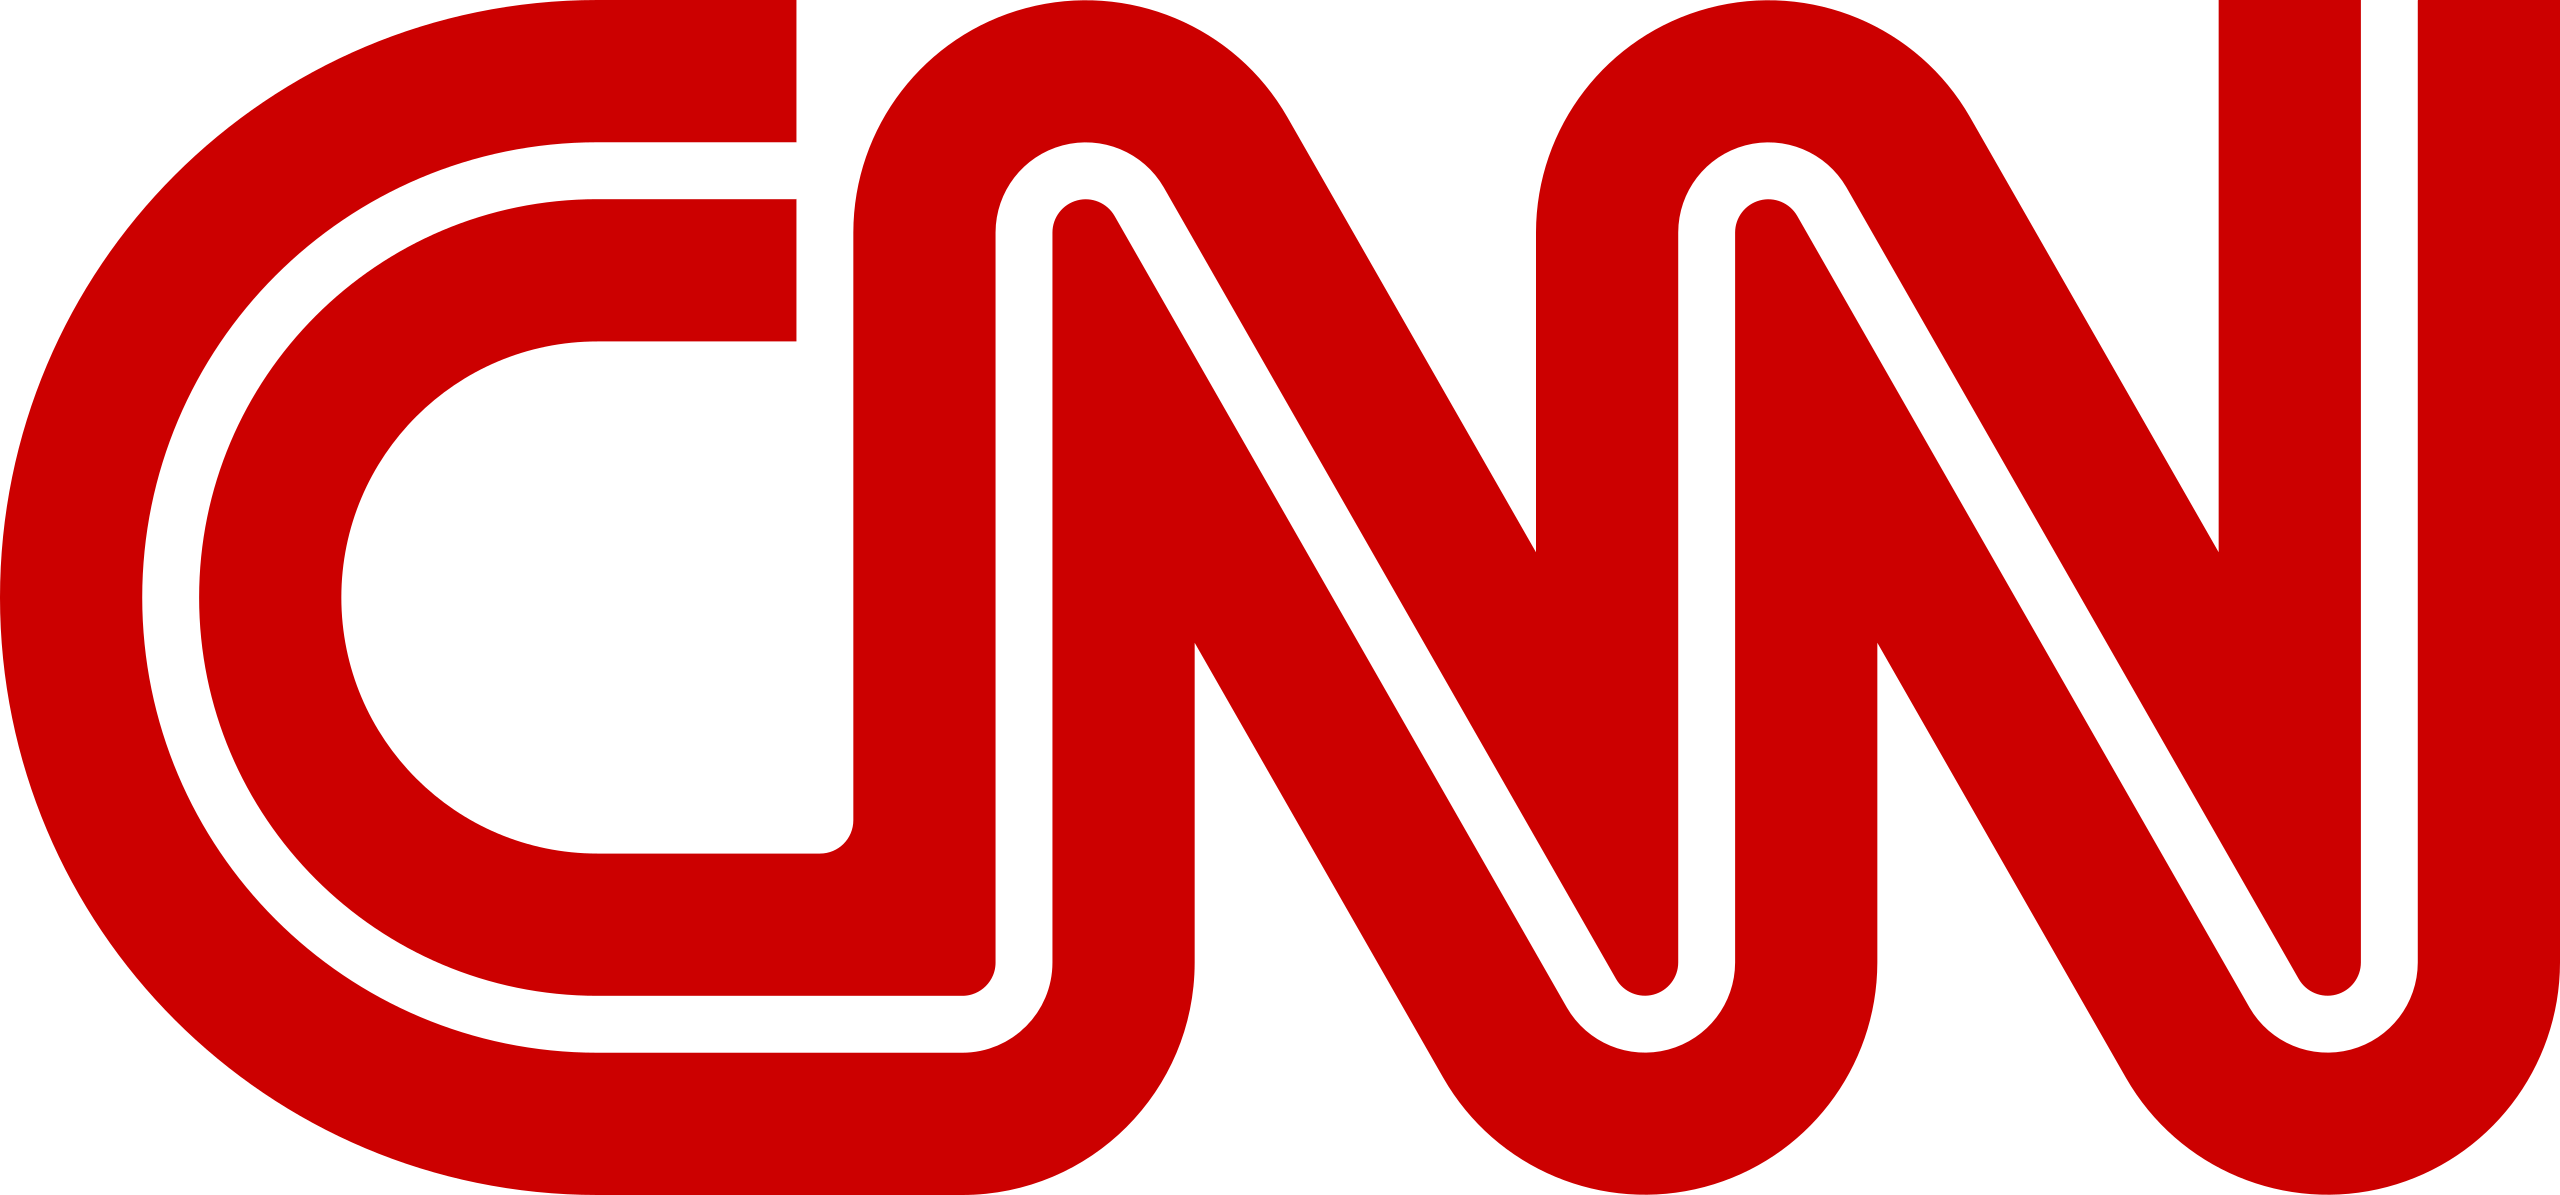 The letters “CNN” in large red and white text.